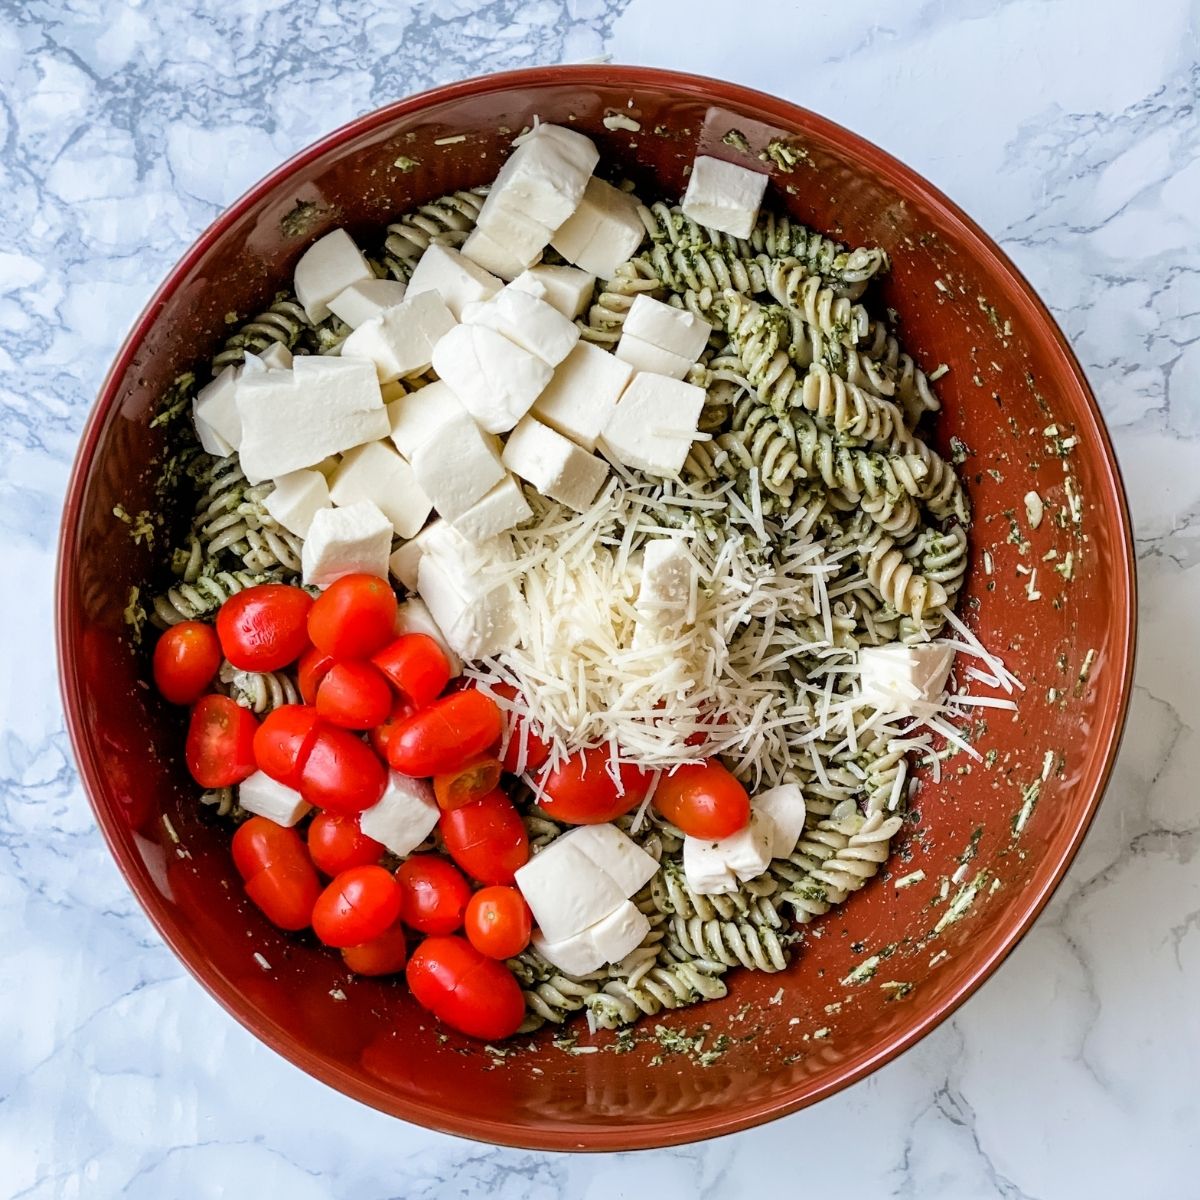 tomatoes, fresh mozzarella, grated cheese in a bowl with pesto past.